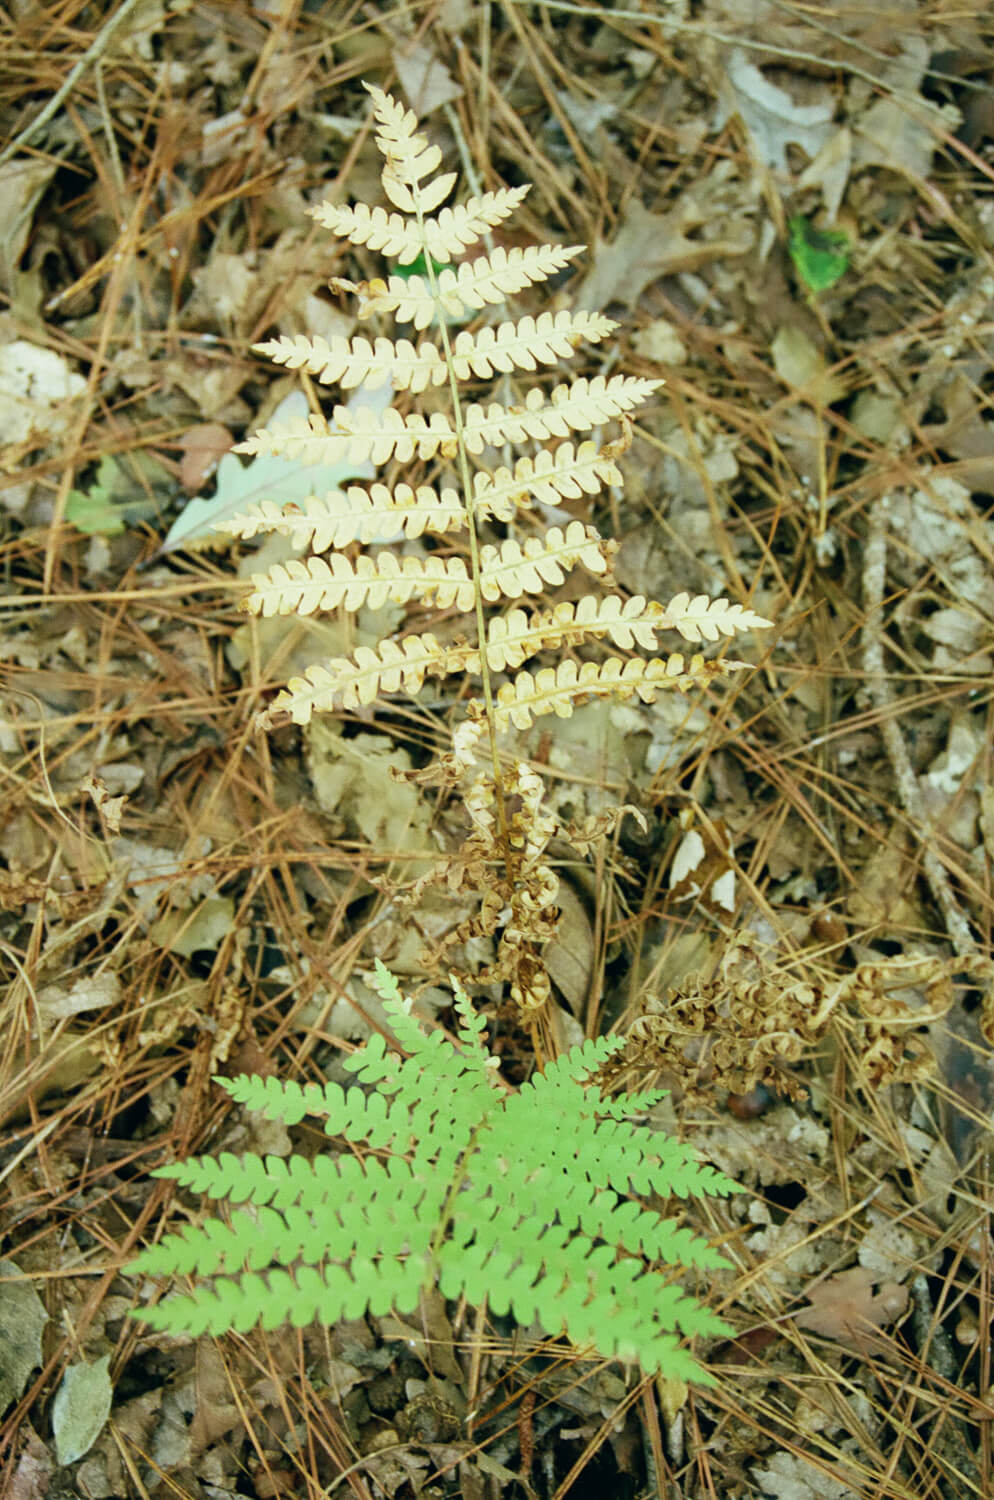 Two ferns - October 19 1:45 PM